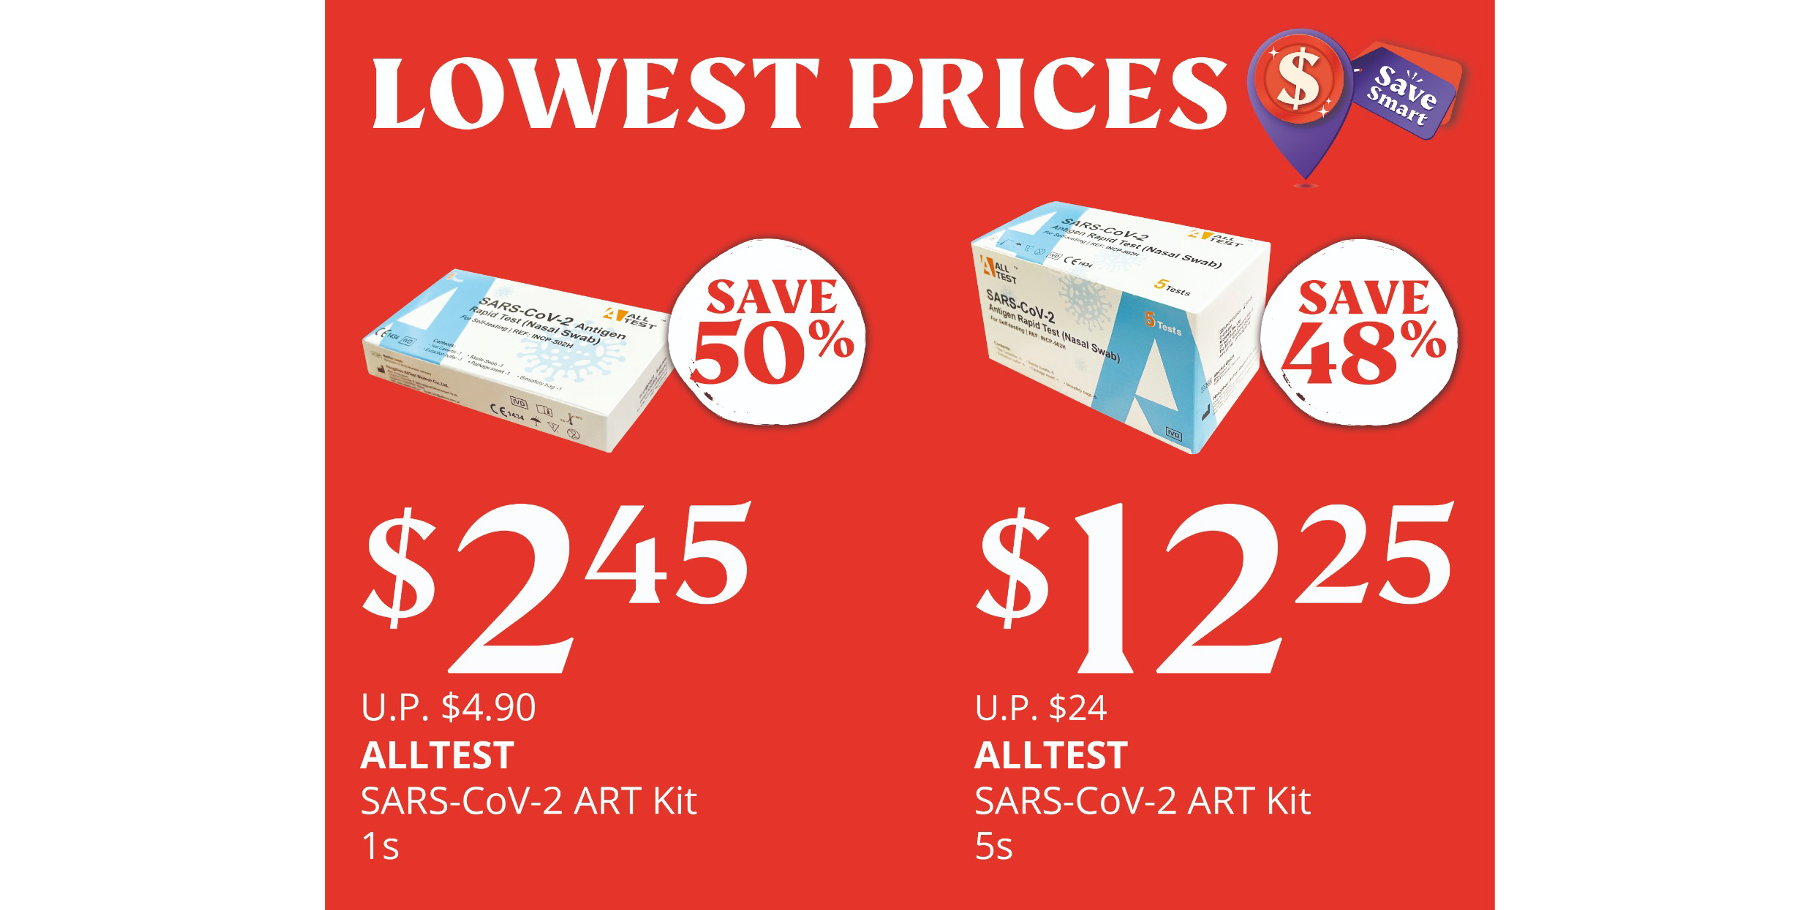 LOWEST PRICE EVER! Up to 50% off ART Test Kits From $2.45, Only at Selected Unity & FairPrice!